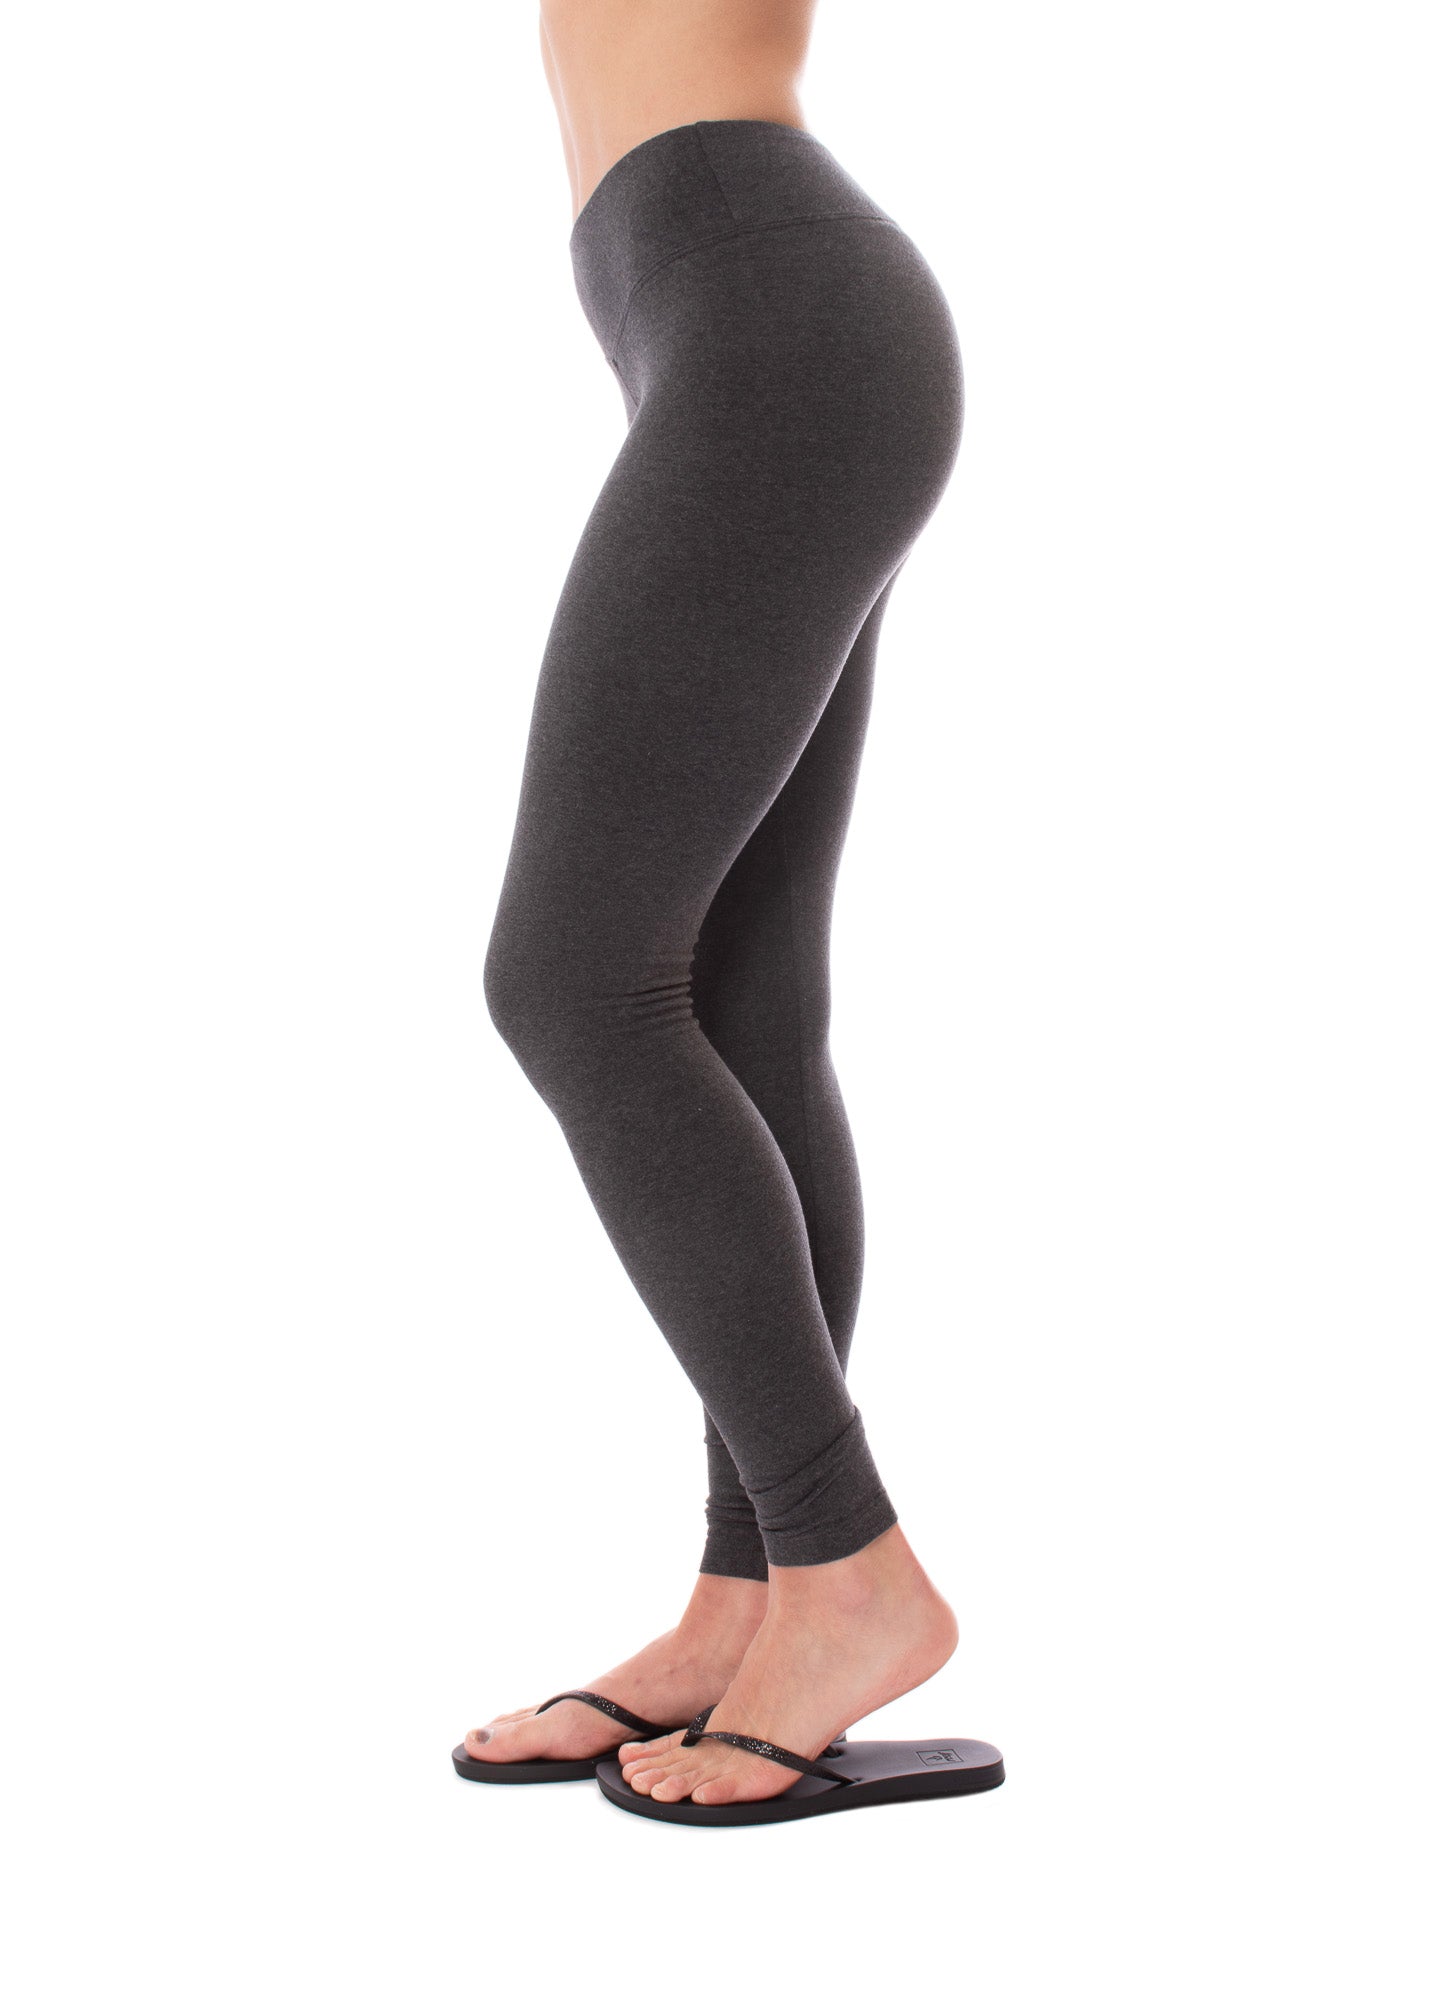 Flat Waist Ankle Legging (Style W-452, Dark Charcoal) by Hard Tail Forever